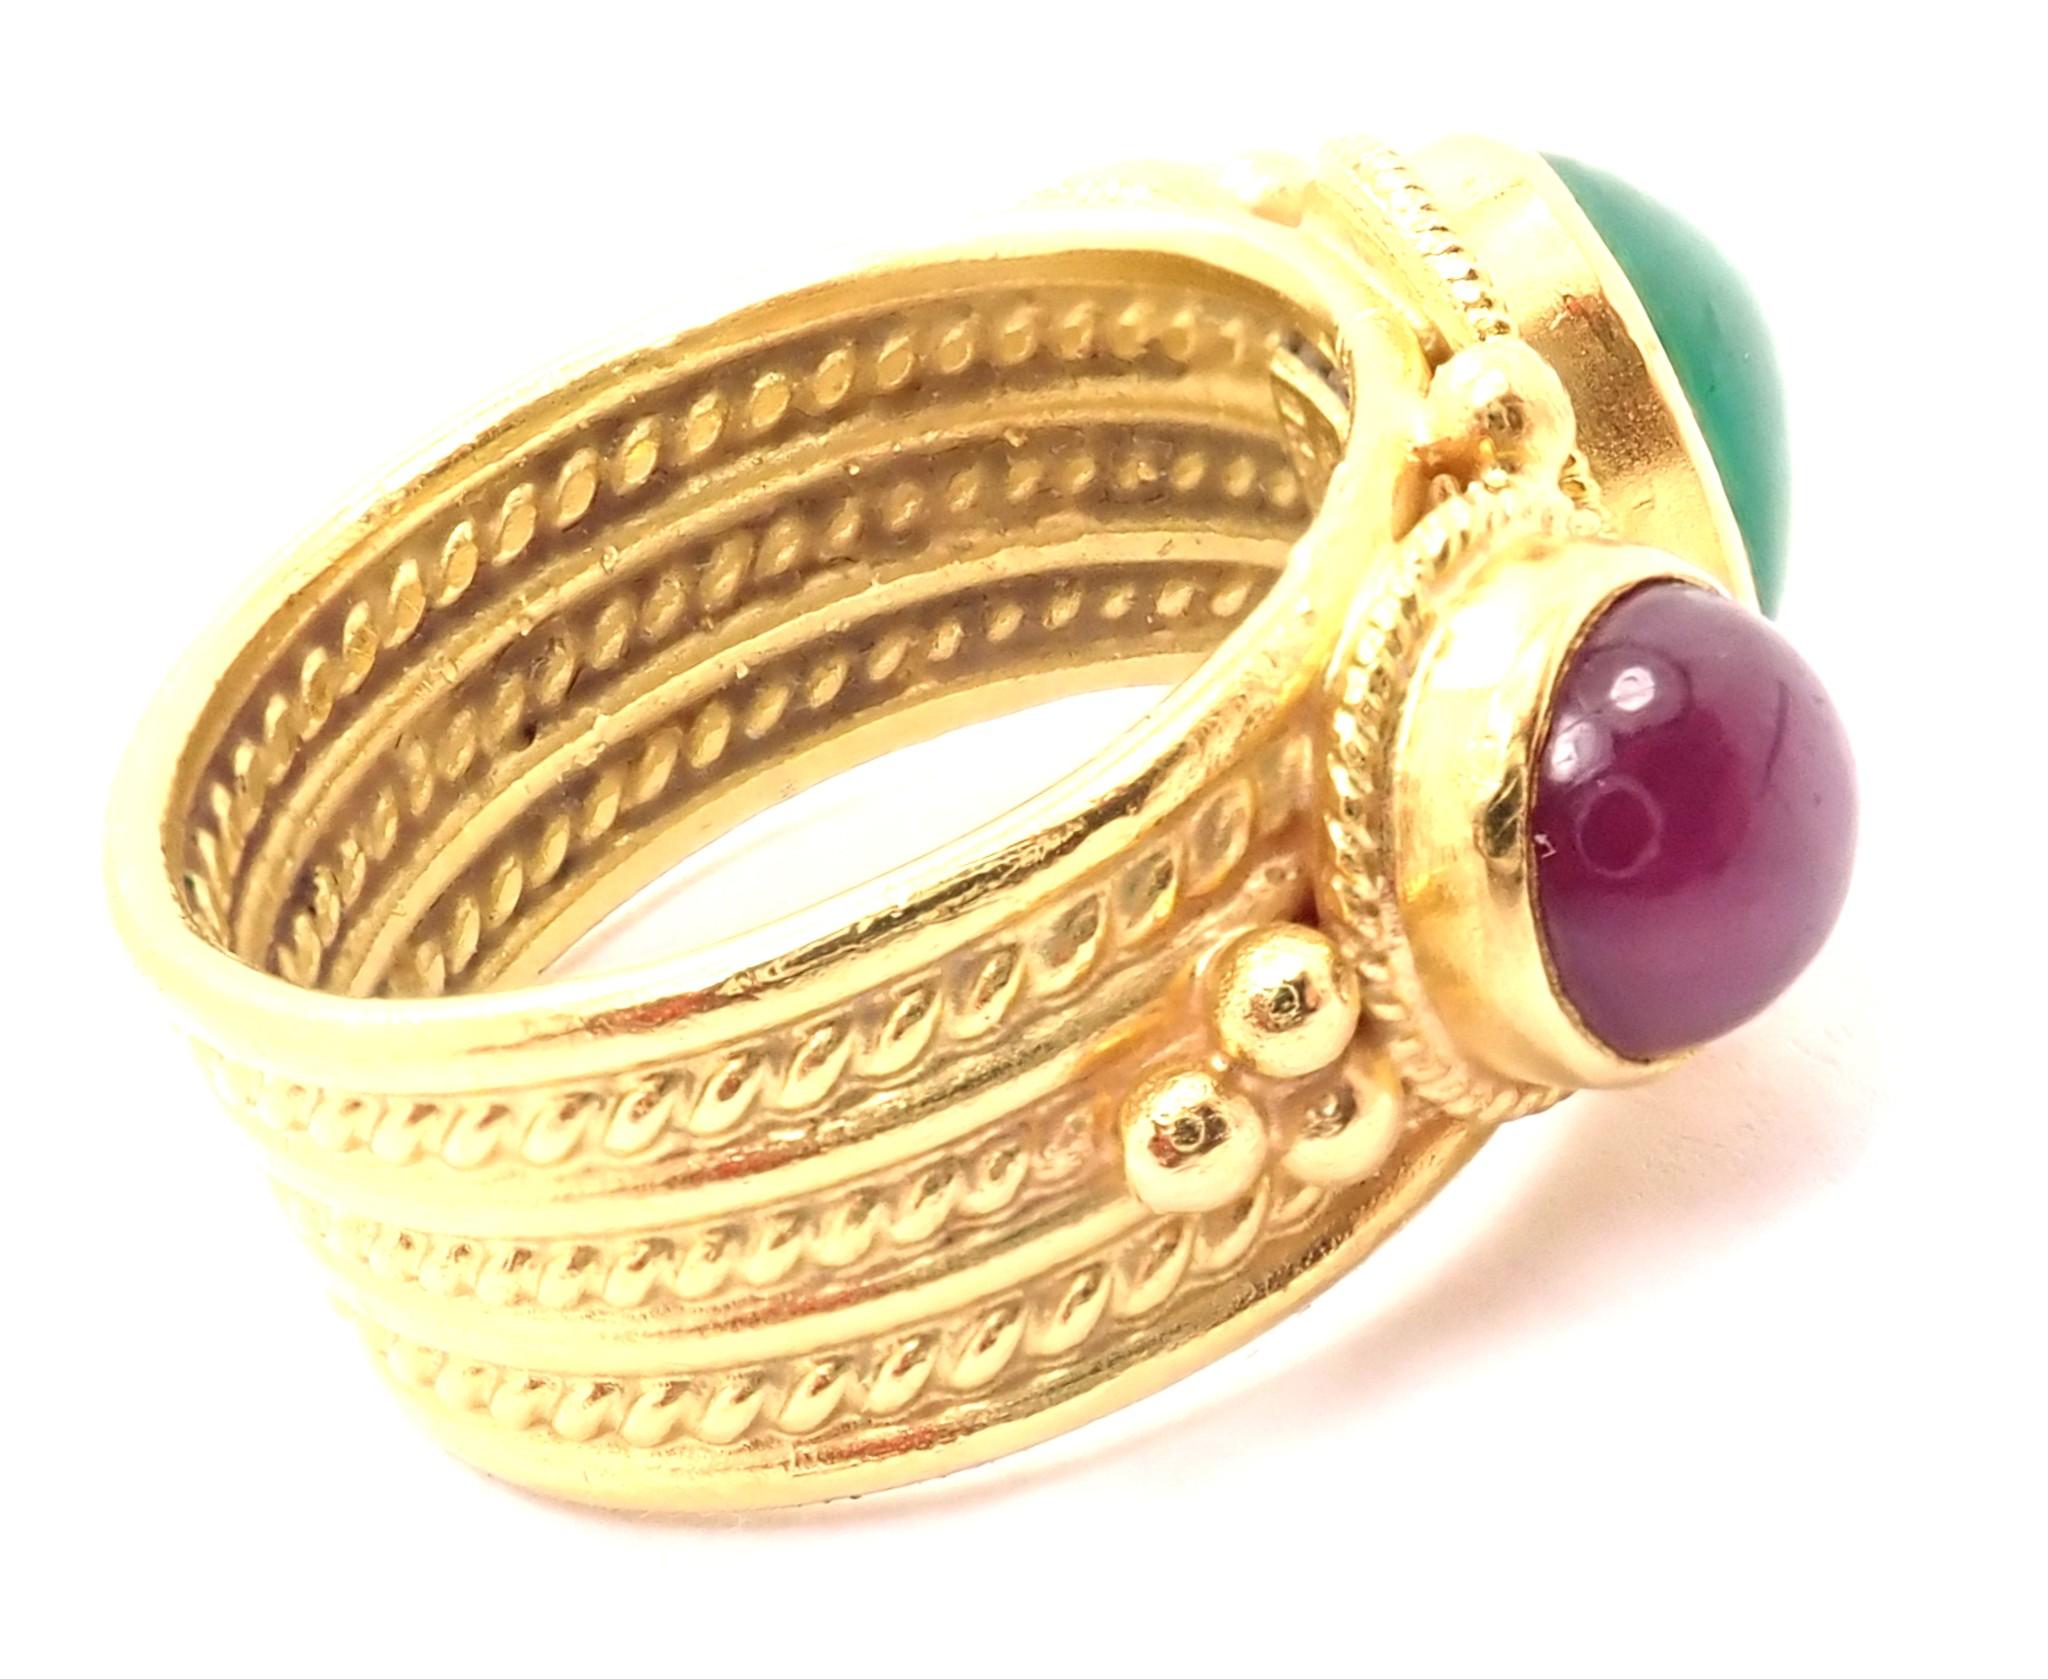 Vintage 18k Yellow Gold Ruby Emerald Band Ring by Ilias Lalaounis. 
With 1 oval cabochon emerald 10mm x 8mm
2 round cabochon rubies 7mm each
Details: 
Ring Size: 5 3/4
Weight: 10.9 grams
Width: 11mm
Stamped Hallmarks: Lalaounis Hallmark A.8 750